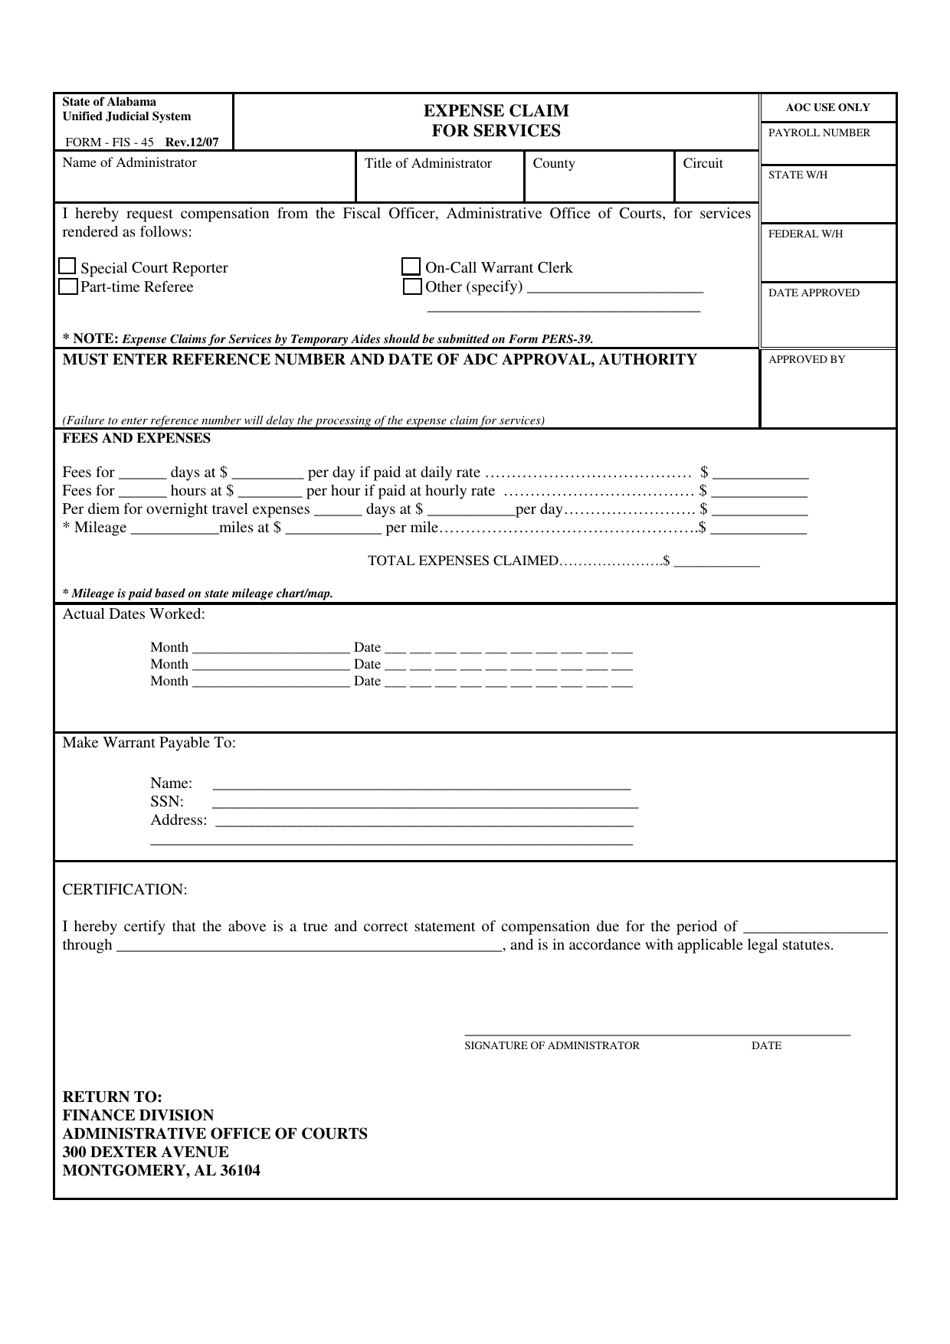 Form FIS-45 Expense Claim for Services - Alabama, Page 1